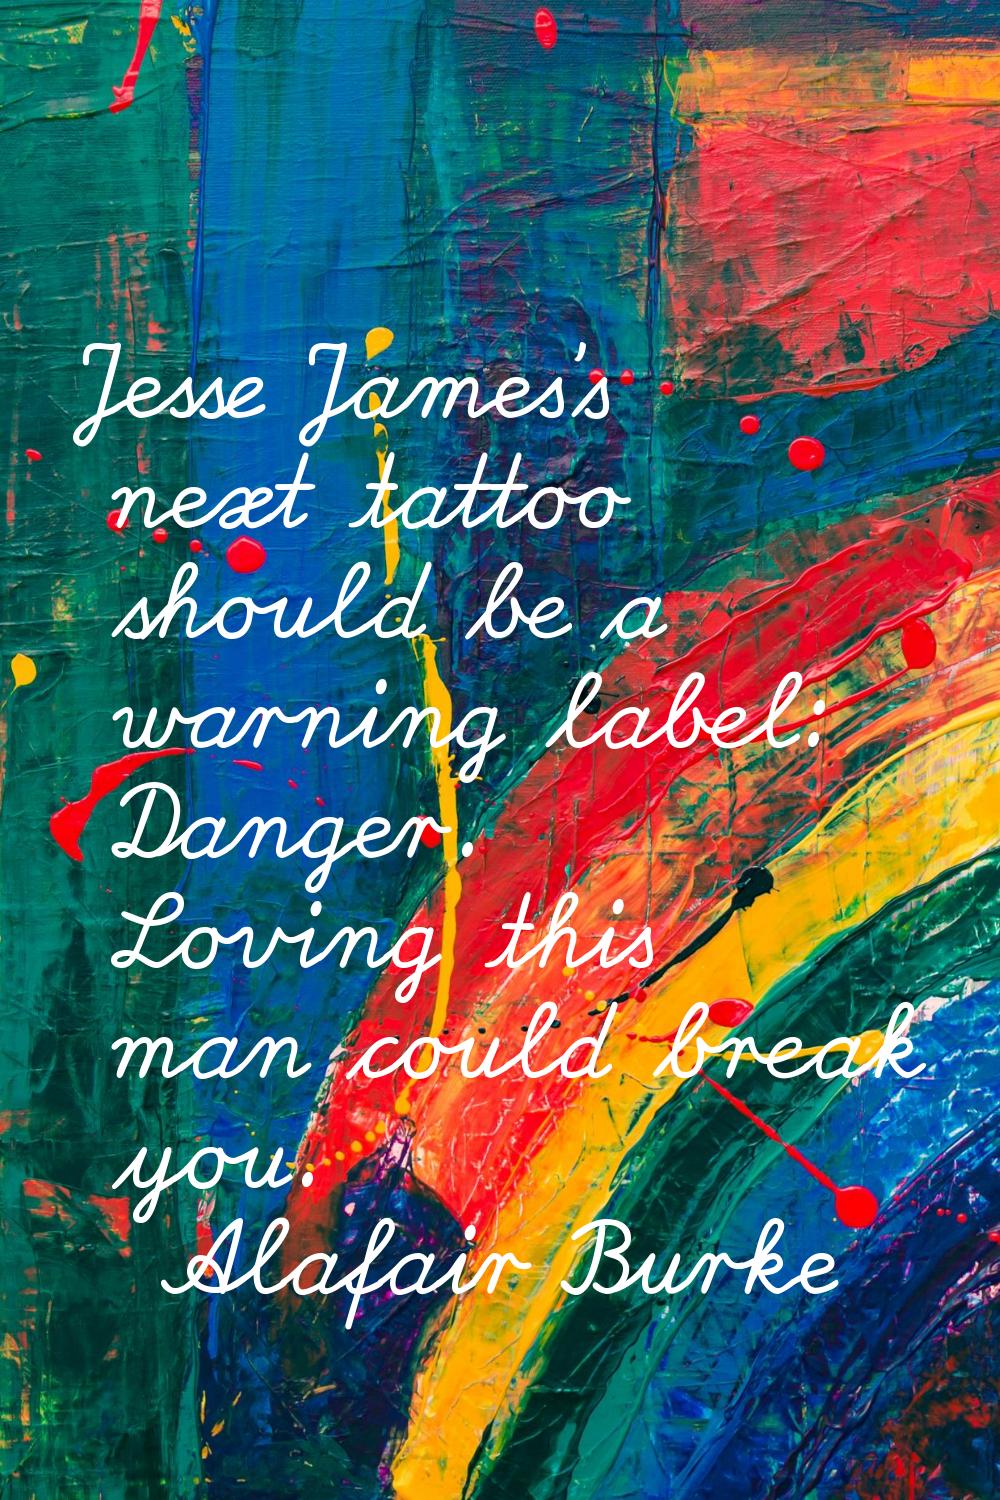 Jesse James's next tattoo should be a warning label: Danger. Loving this man could break you.